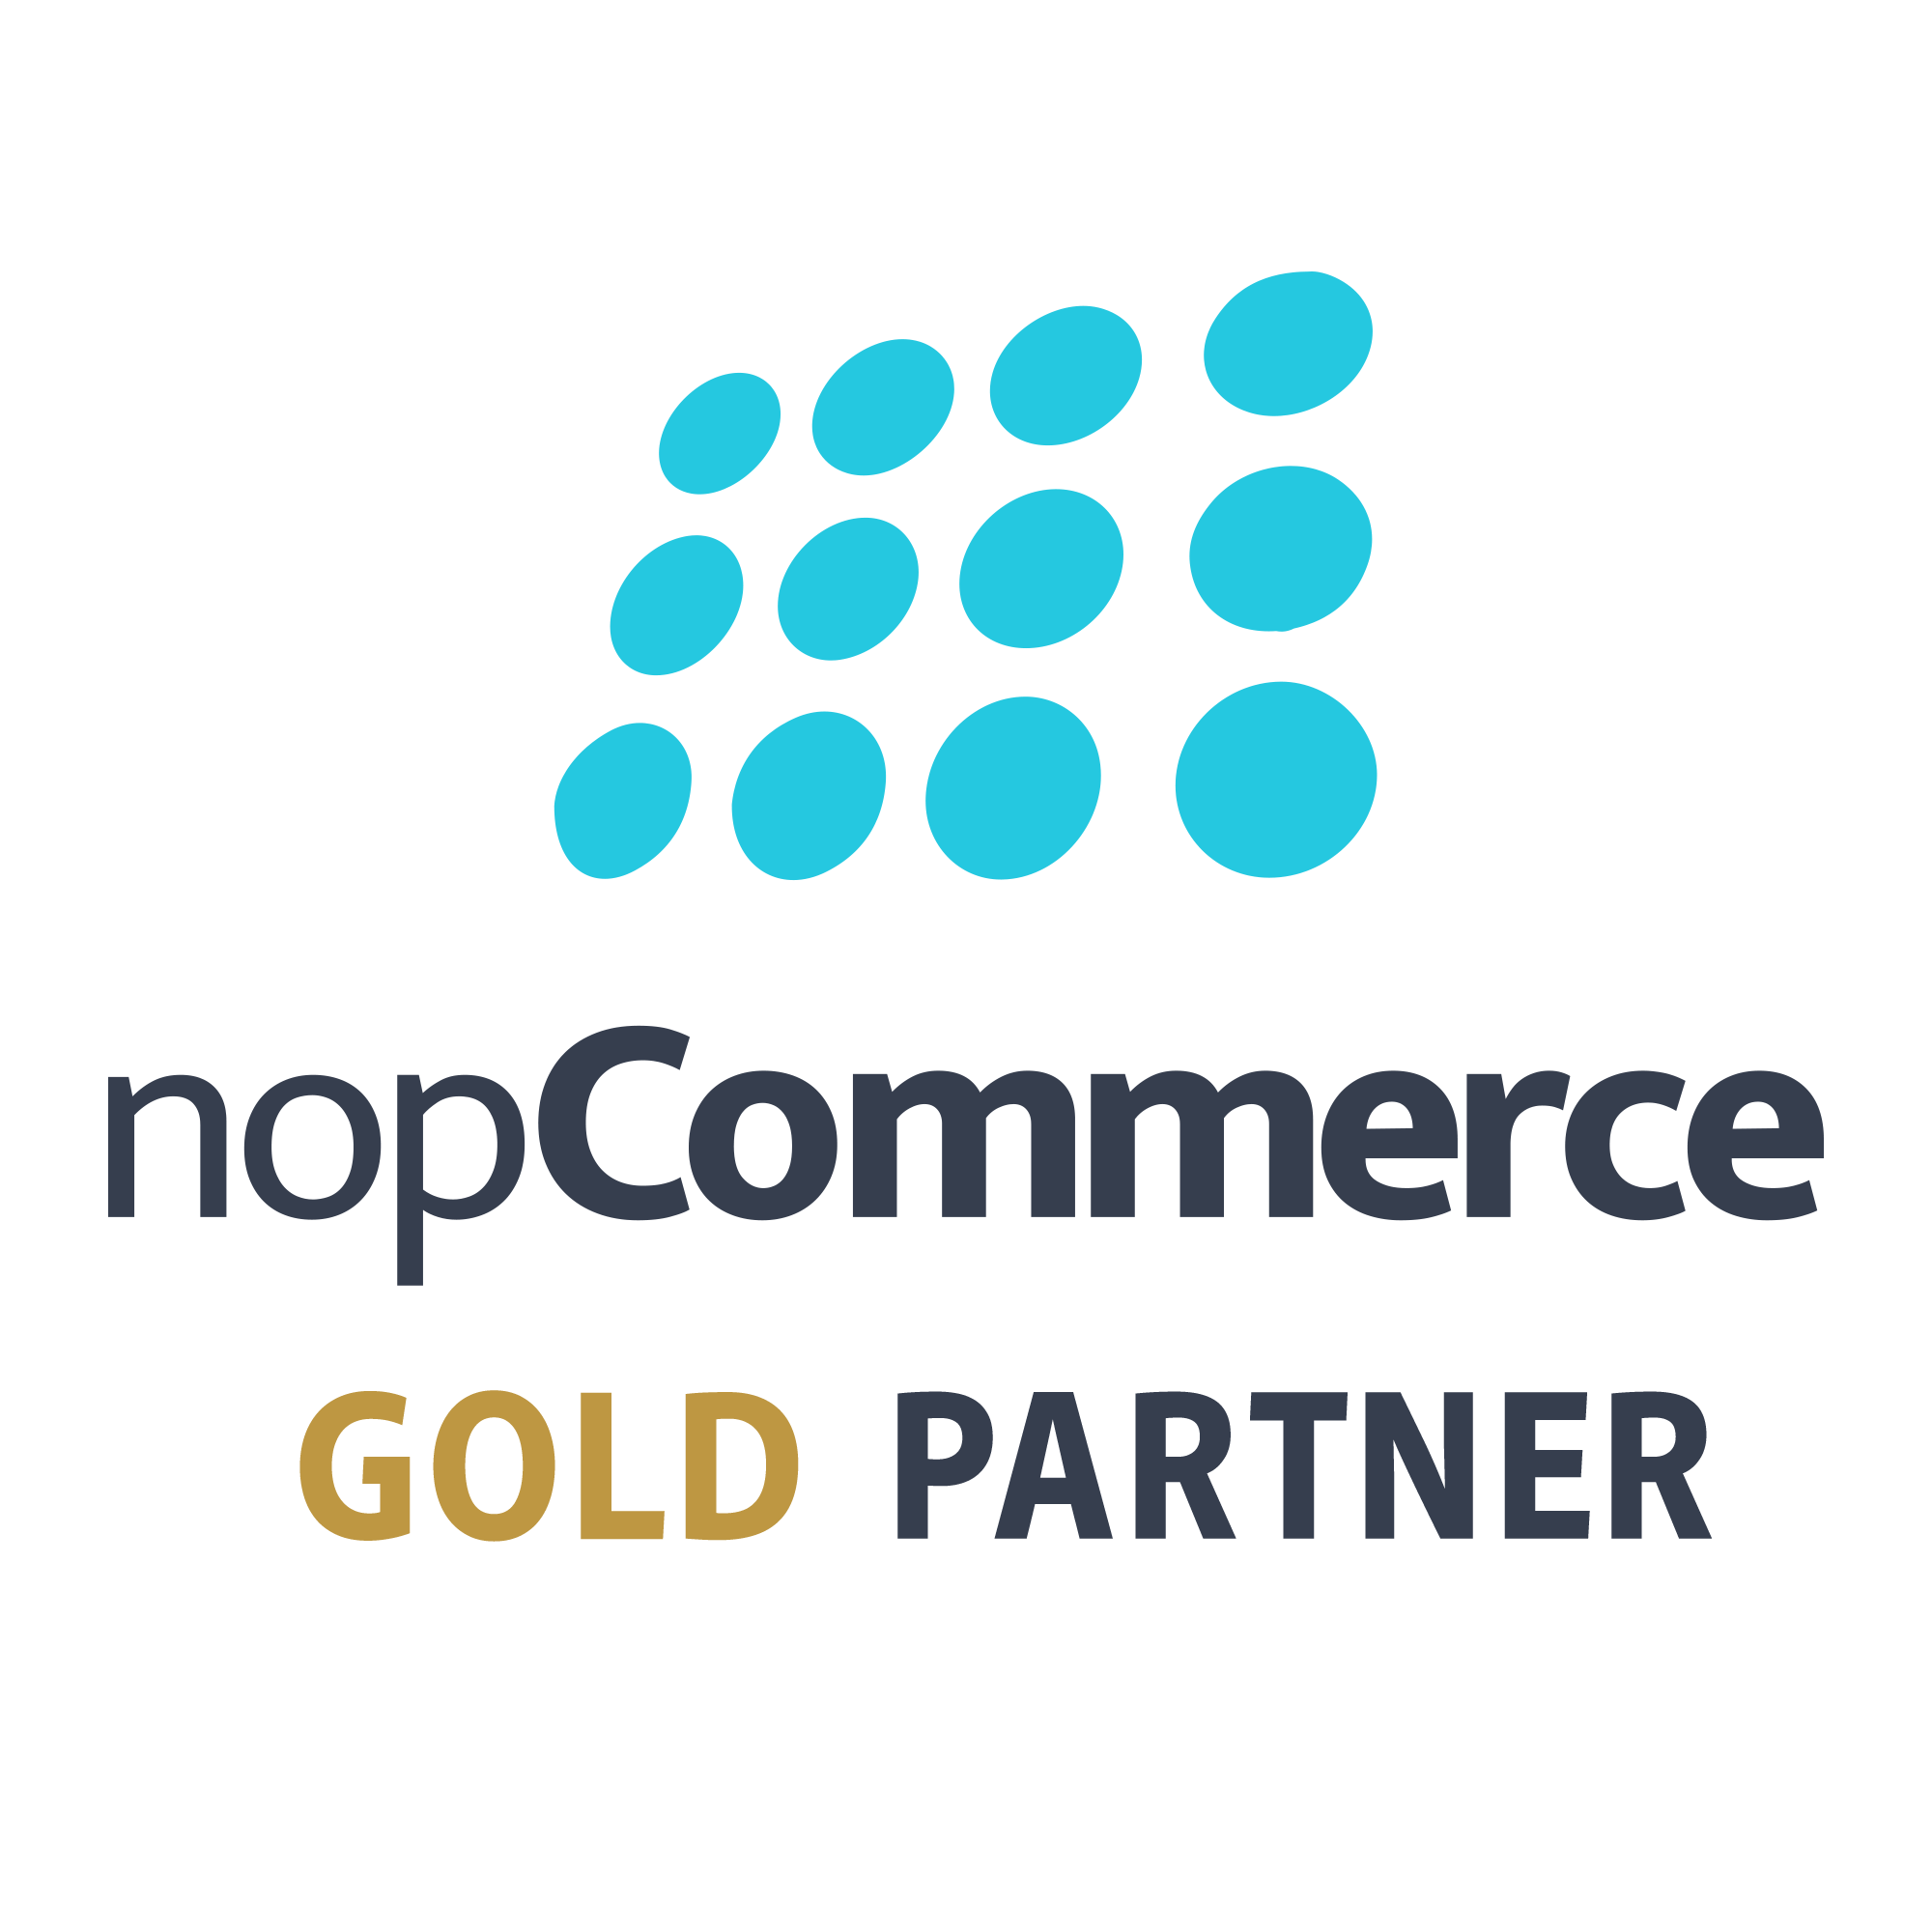 Differenz System is a NopCommerce Gold Partner